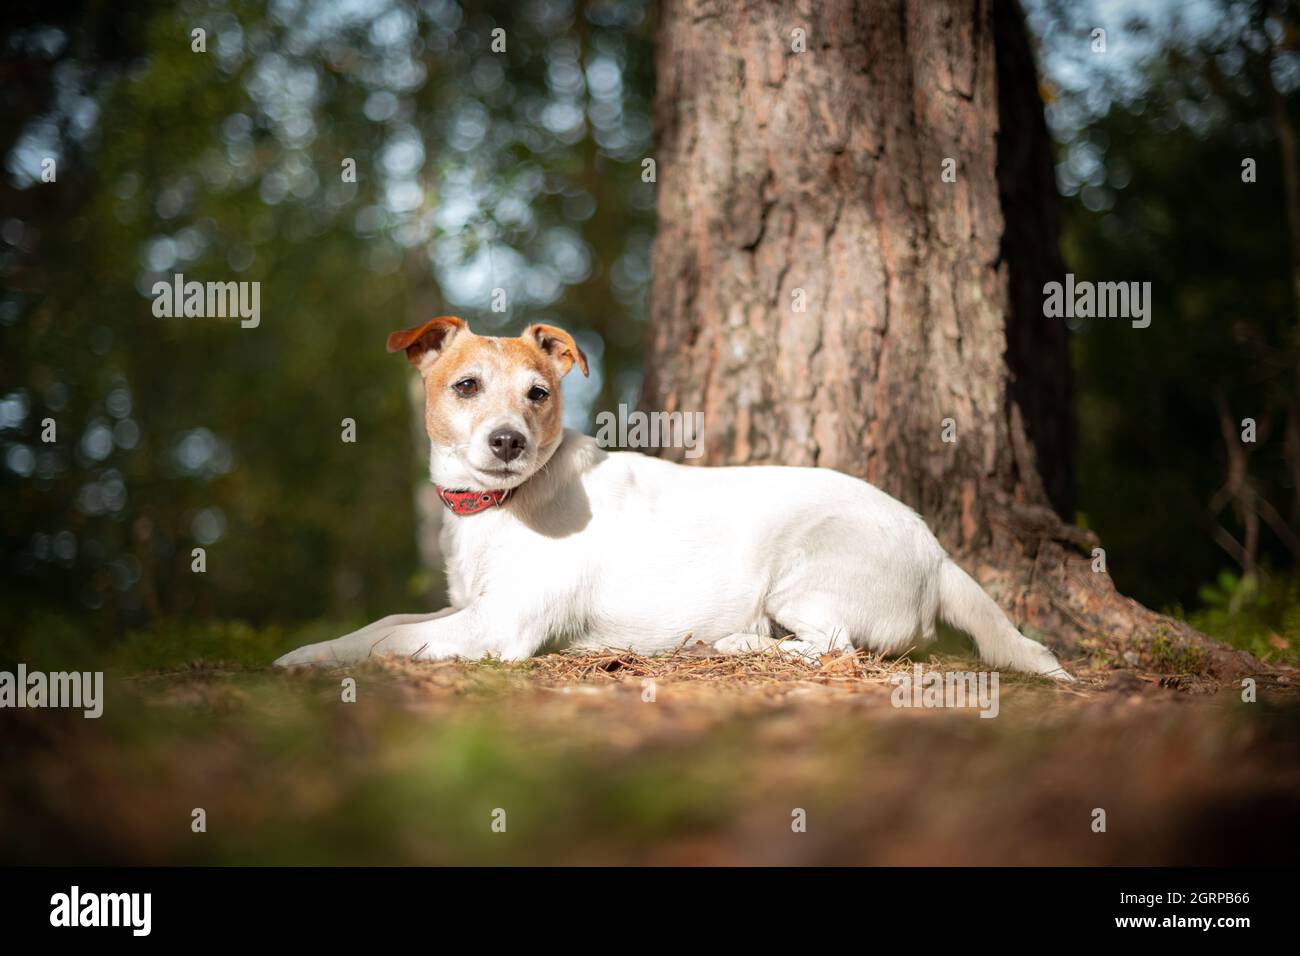 Jack russel terrier dog in green spring forest with lush foliage. Animal and nature photography Stock Photo